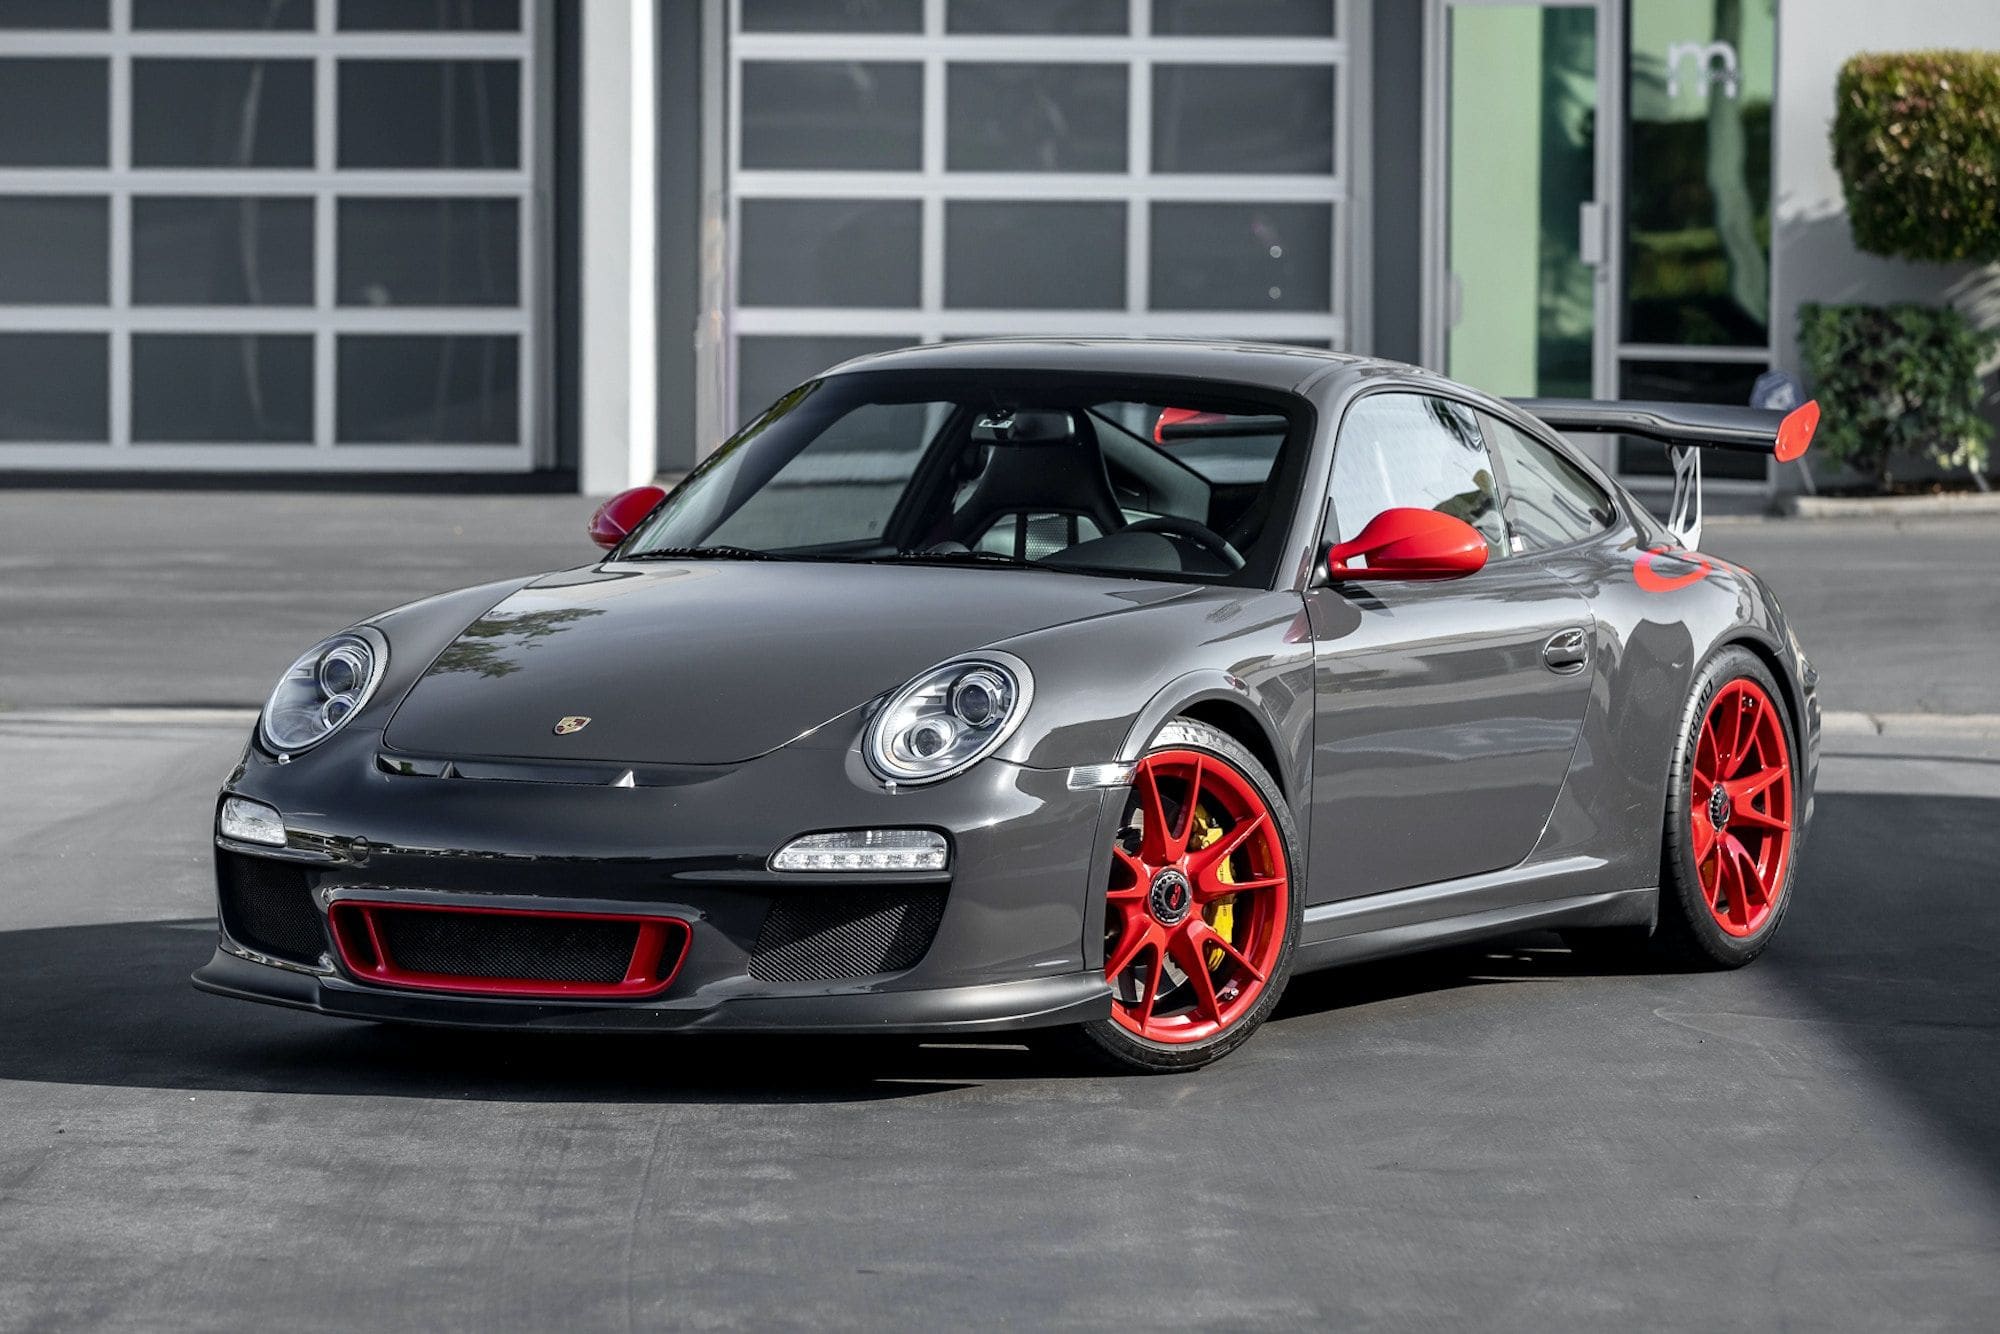 2010 - 2011 Porsche GT3 - WTB: 2010/2011 997.2 GT3RS - Used - Coupe - Other - Brea, CA 92821, United States